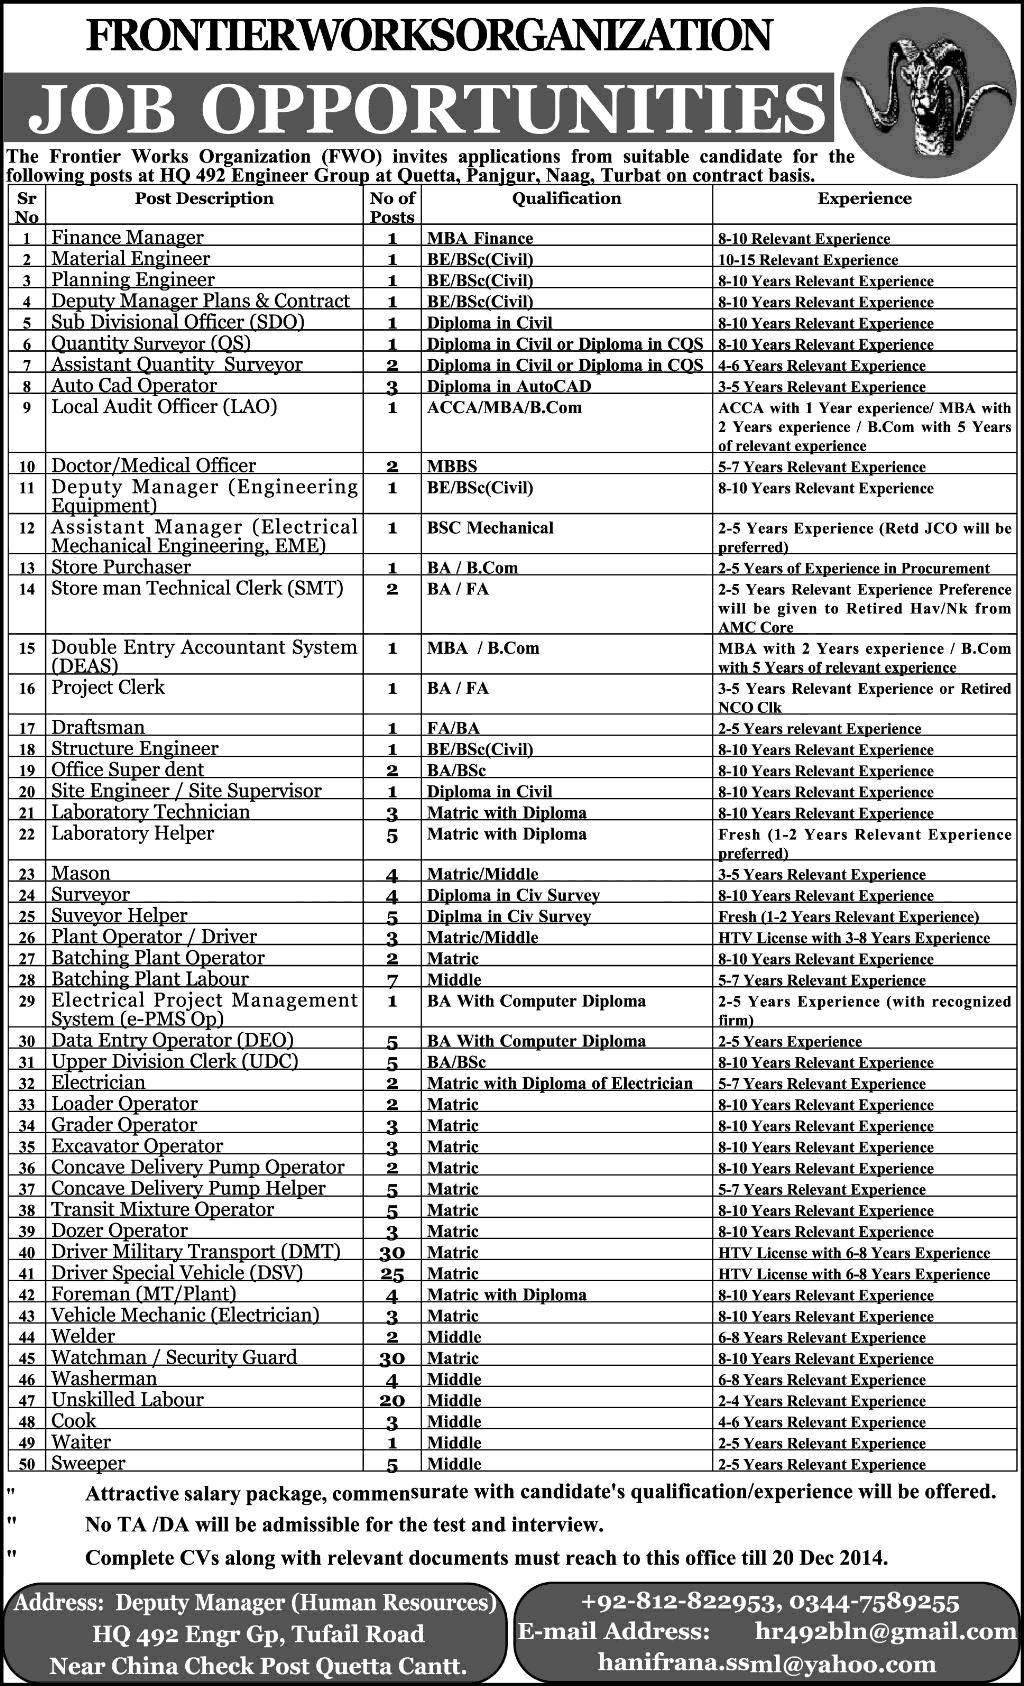 FWO Balochistan Jobs 2014 December HQ 492 Engineer Group Projects in Quetta, Panjgur, Turbat & Naag